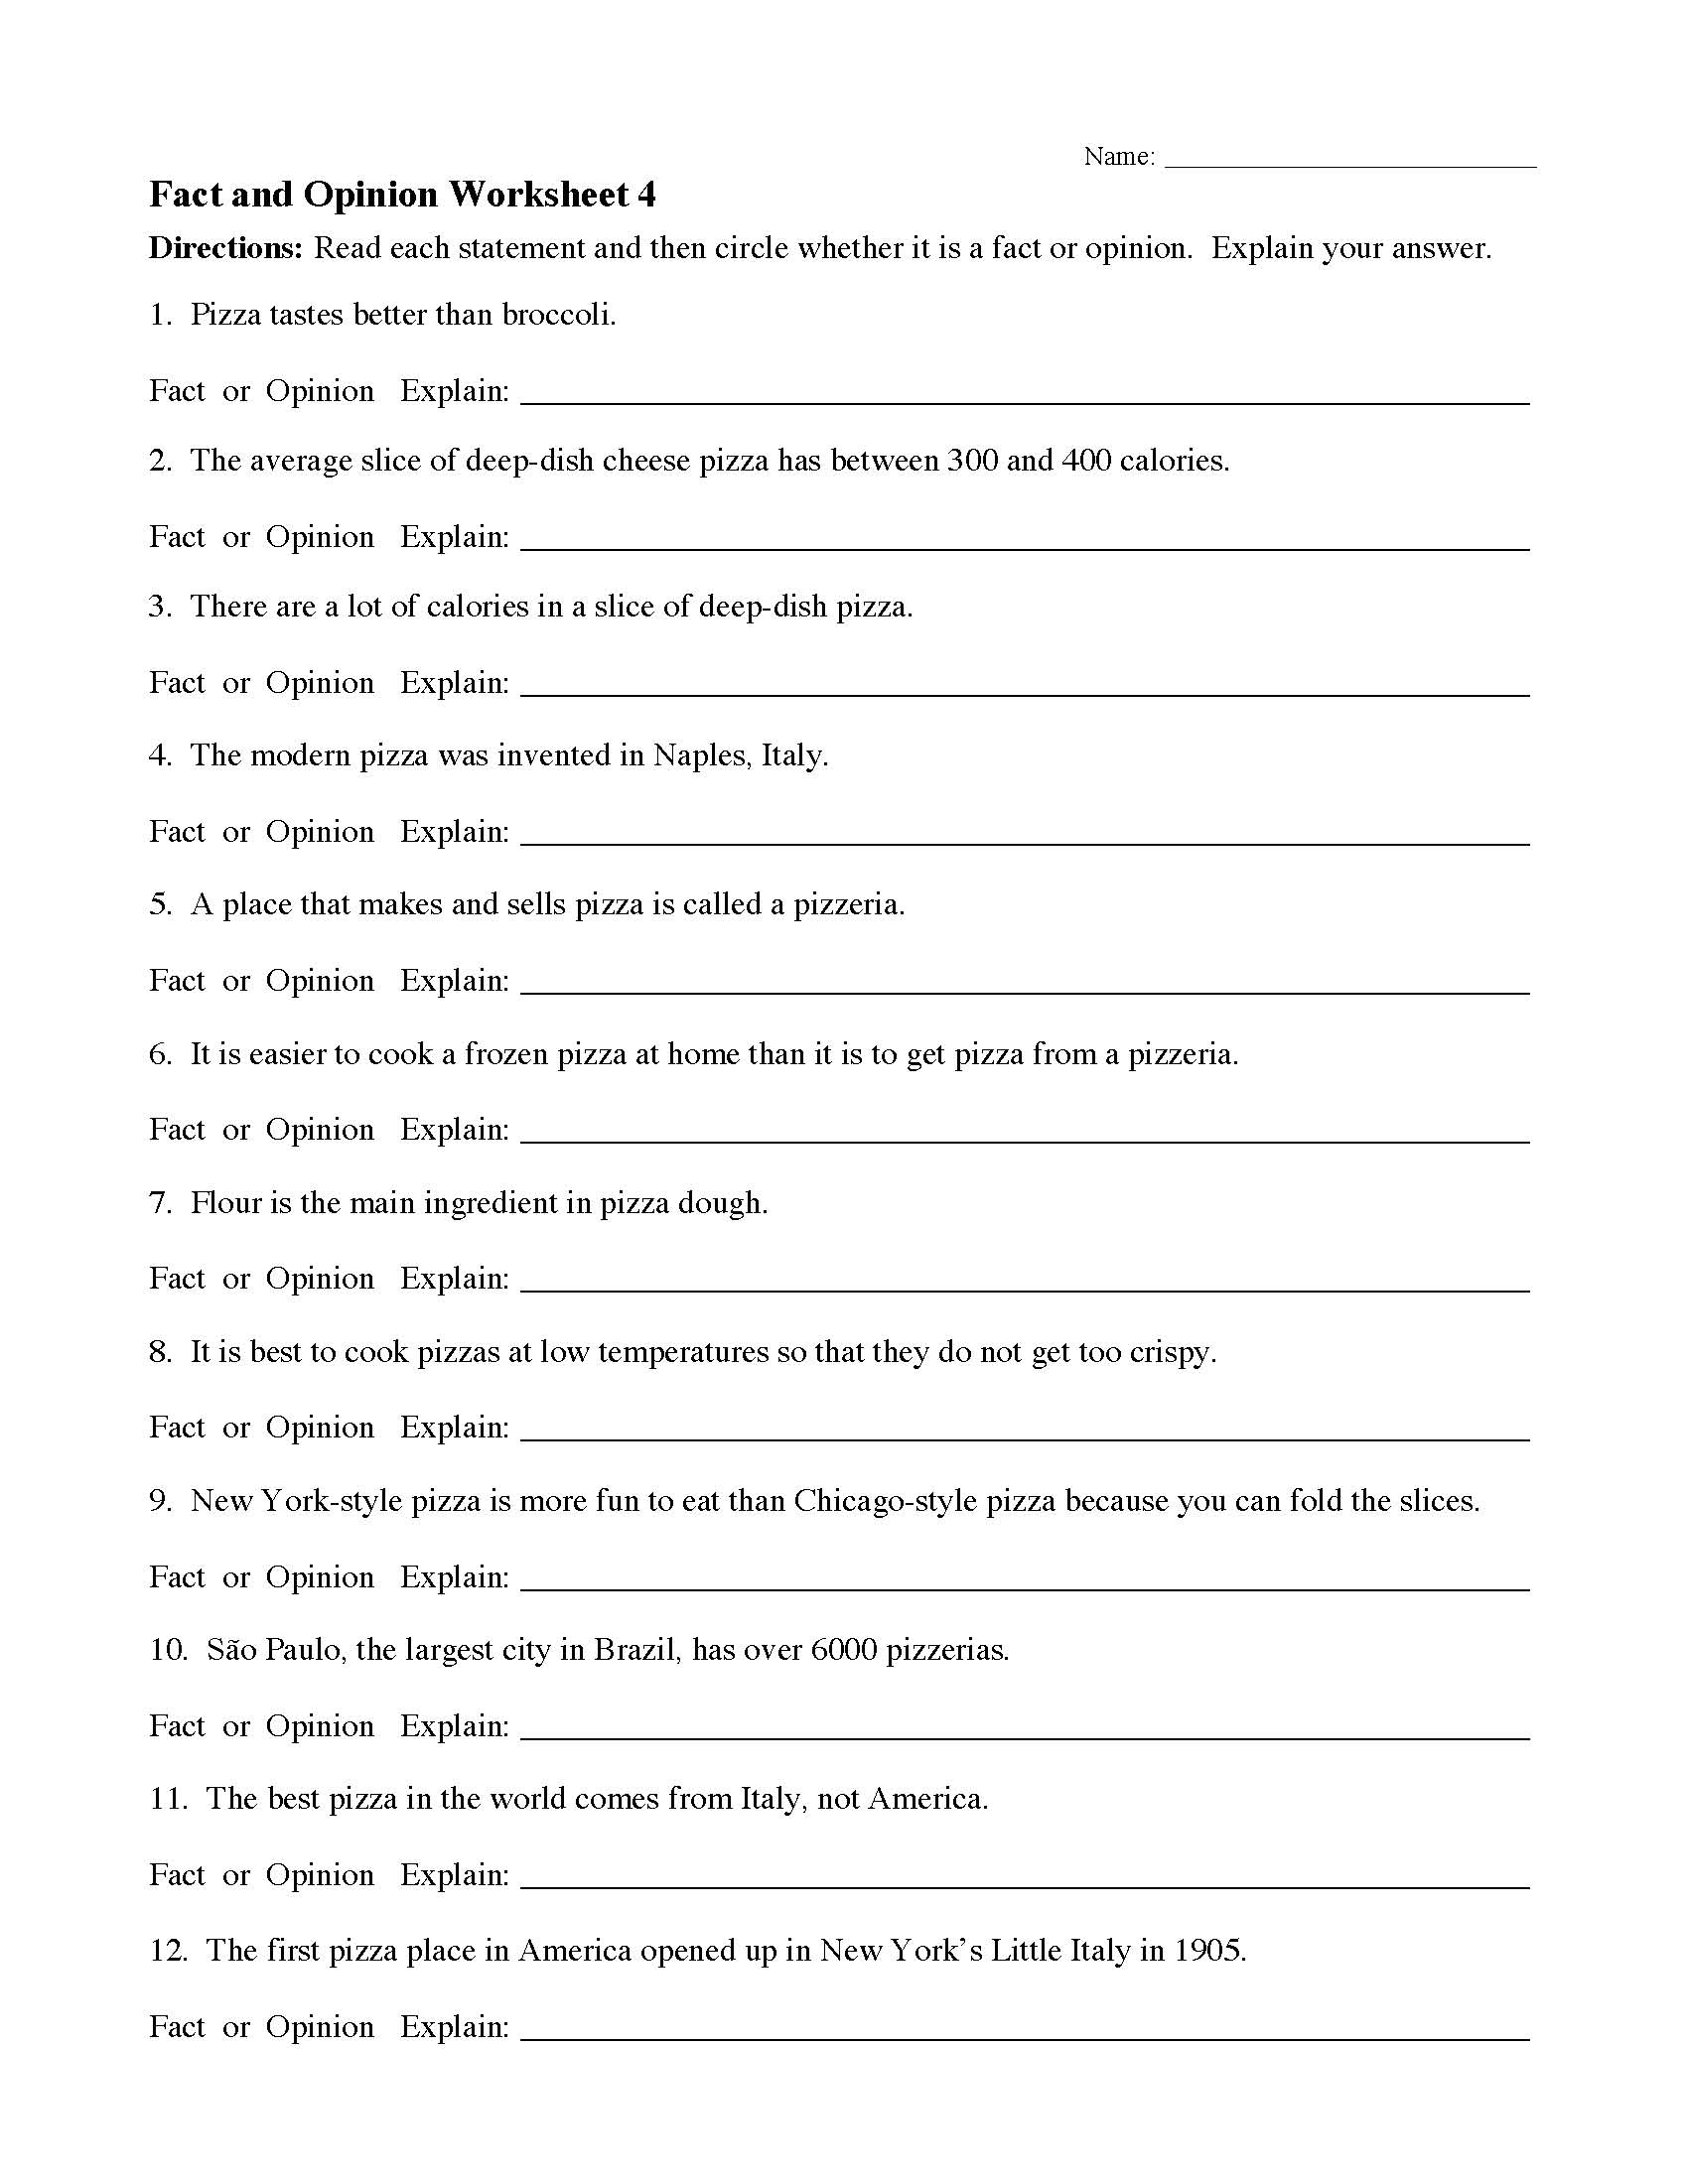 fact and opinion worksheets reading comprehension